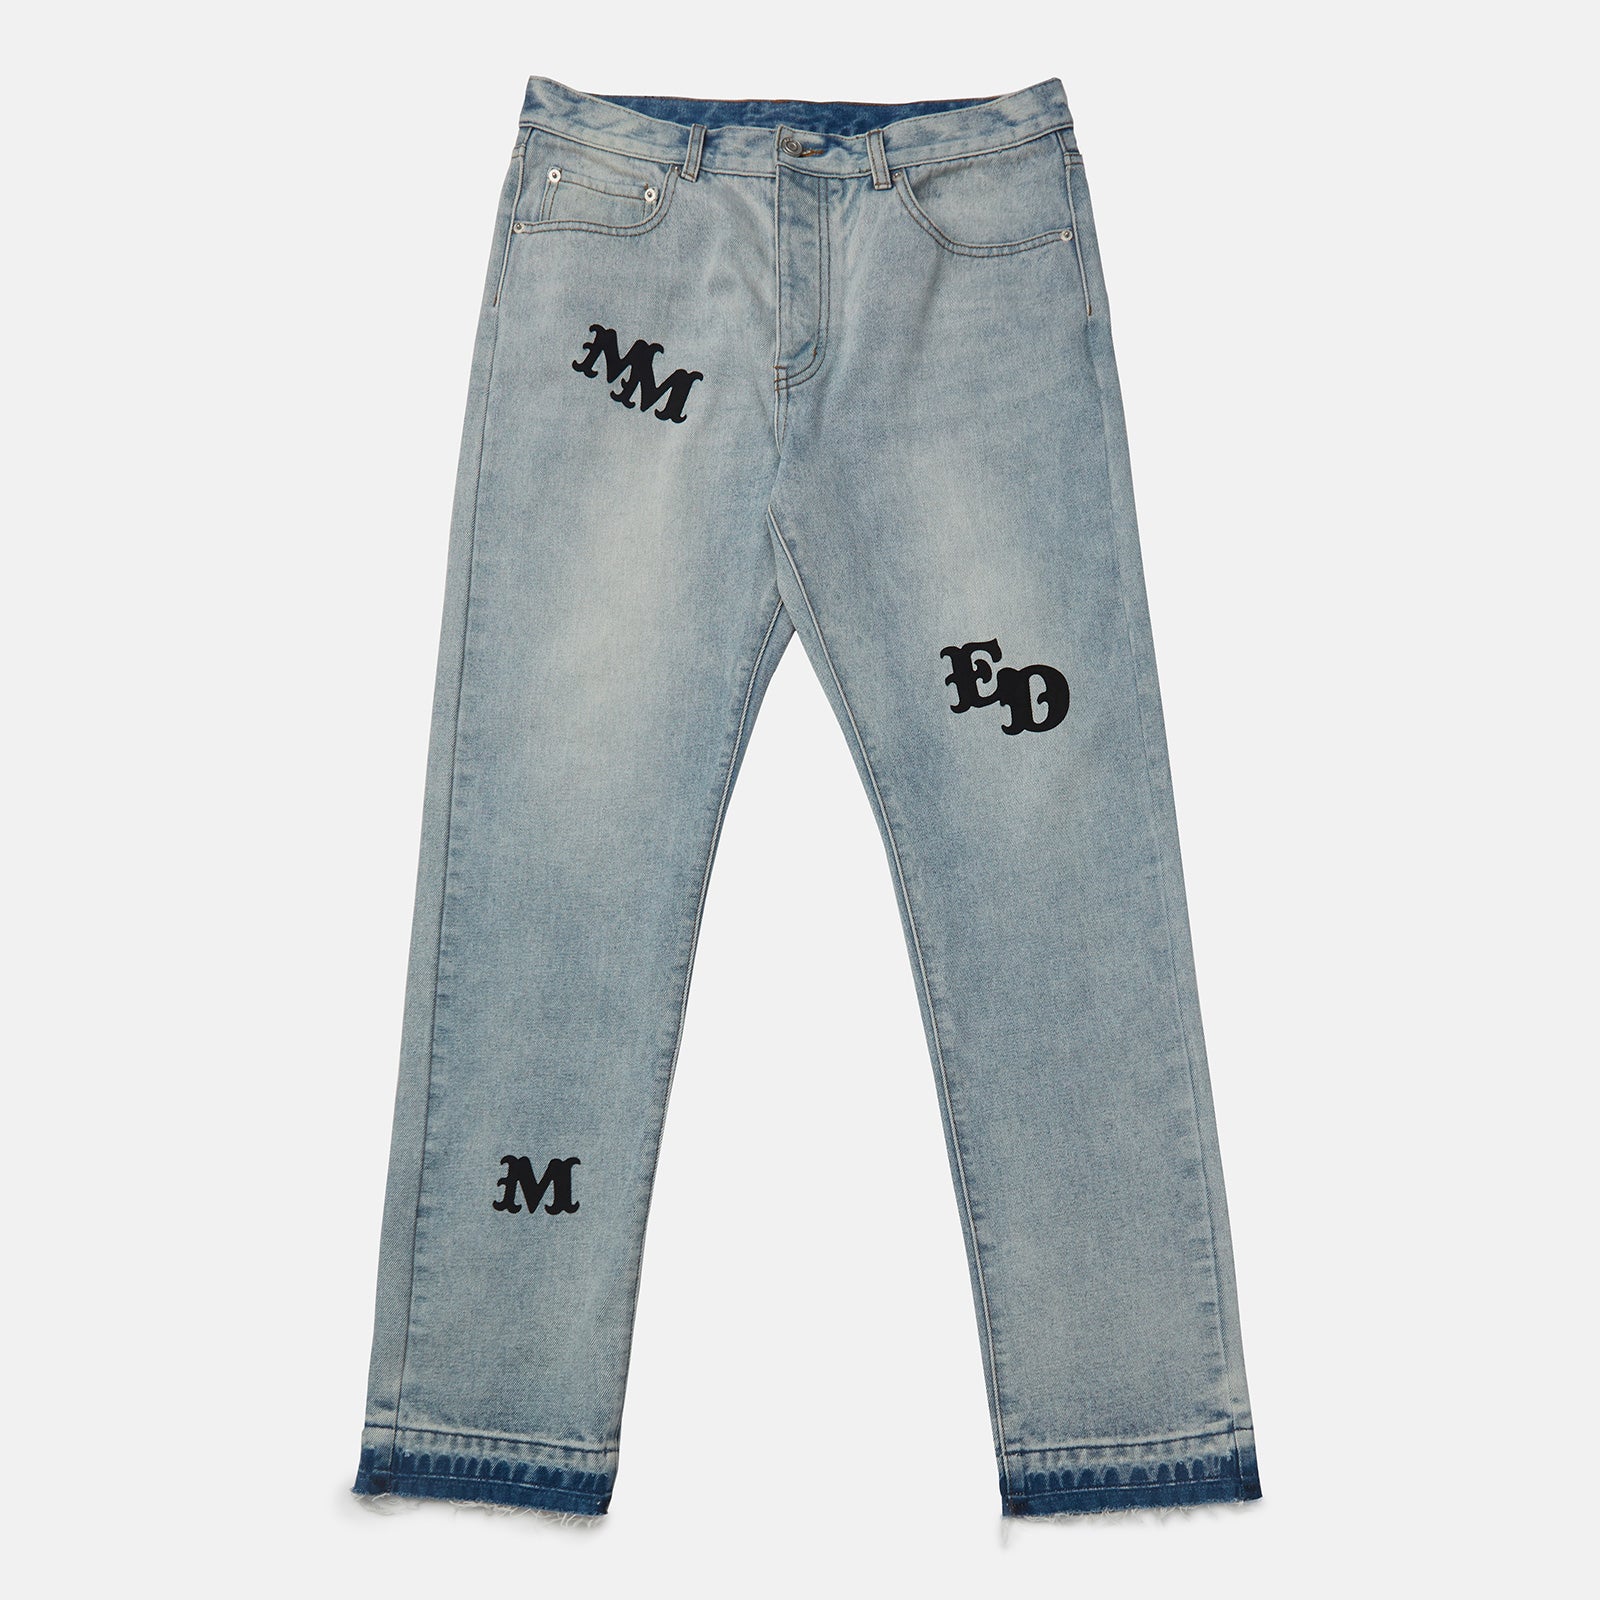 Patched Jeans - INTL Collective